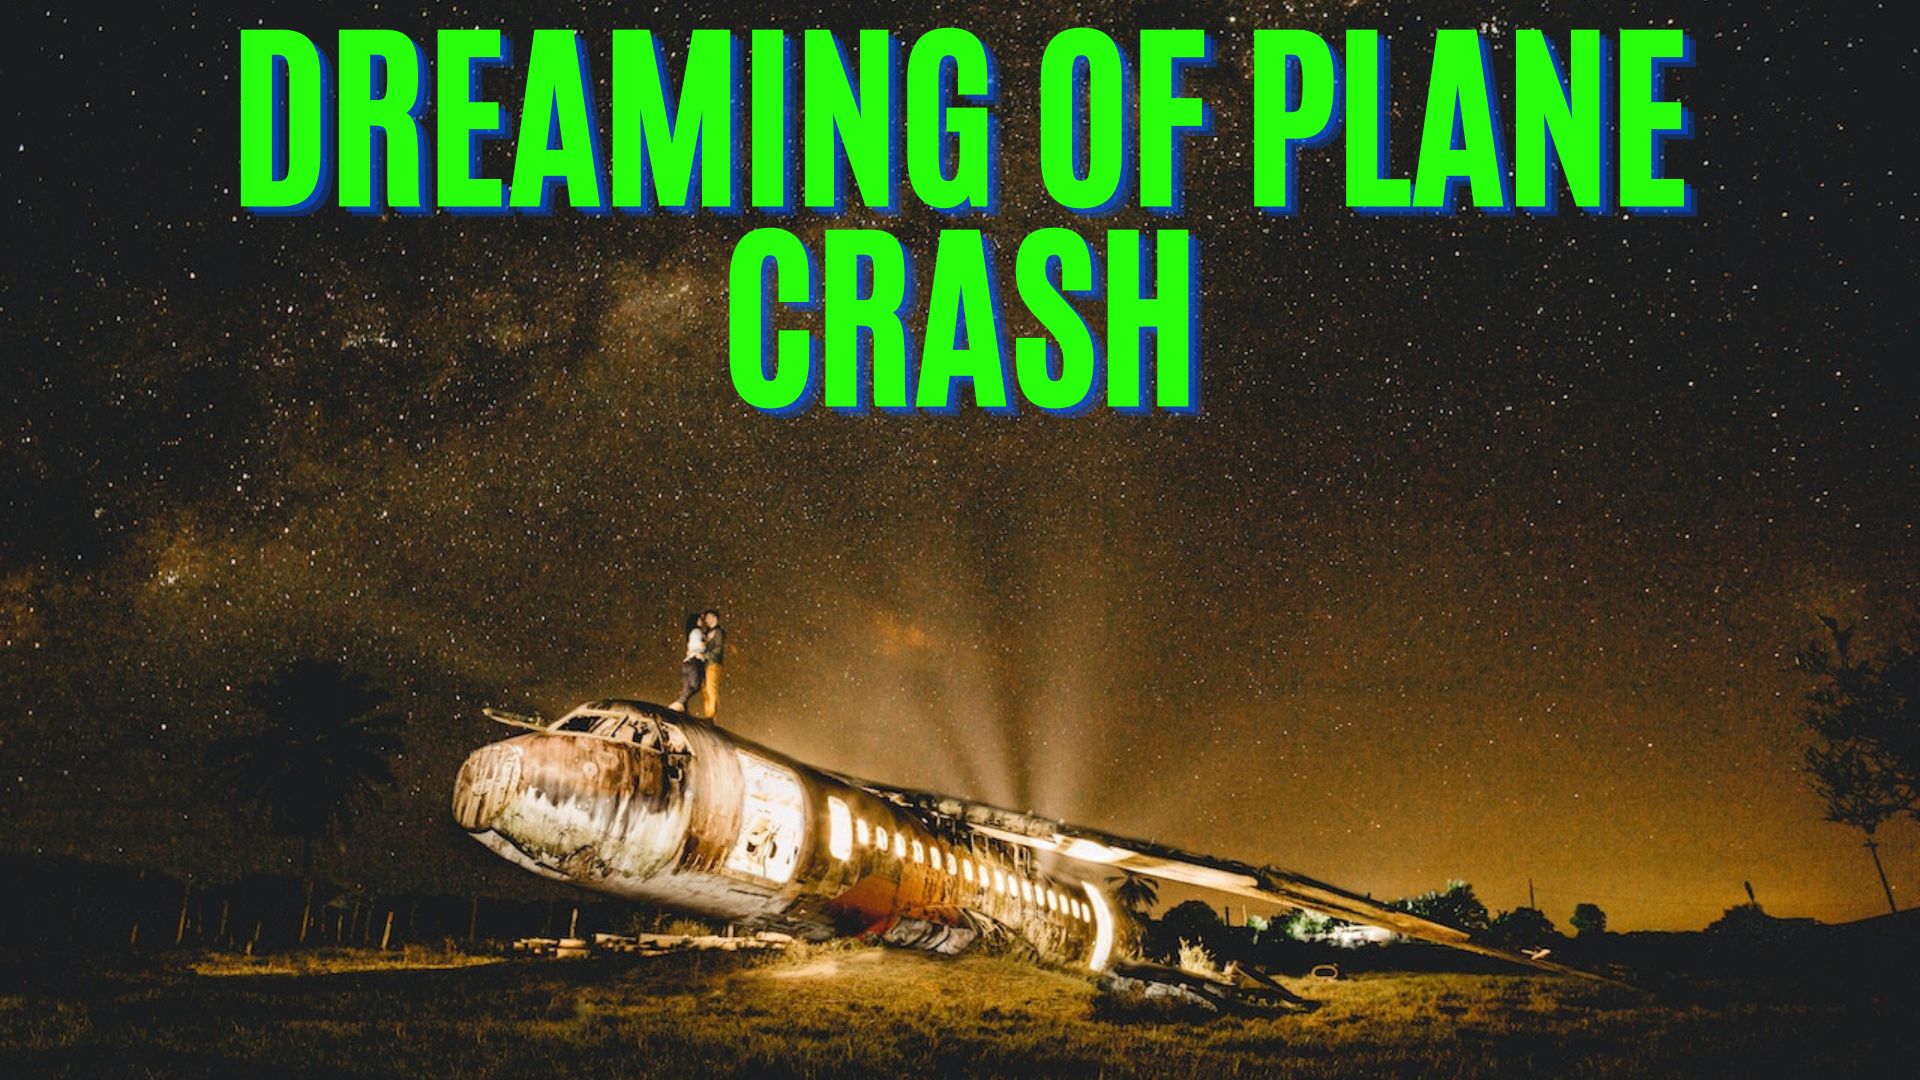 Dreaming Of Plane Crash - Signifies That Your Goals Are Too High